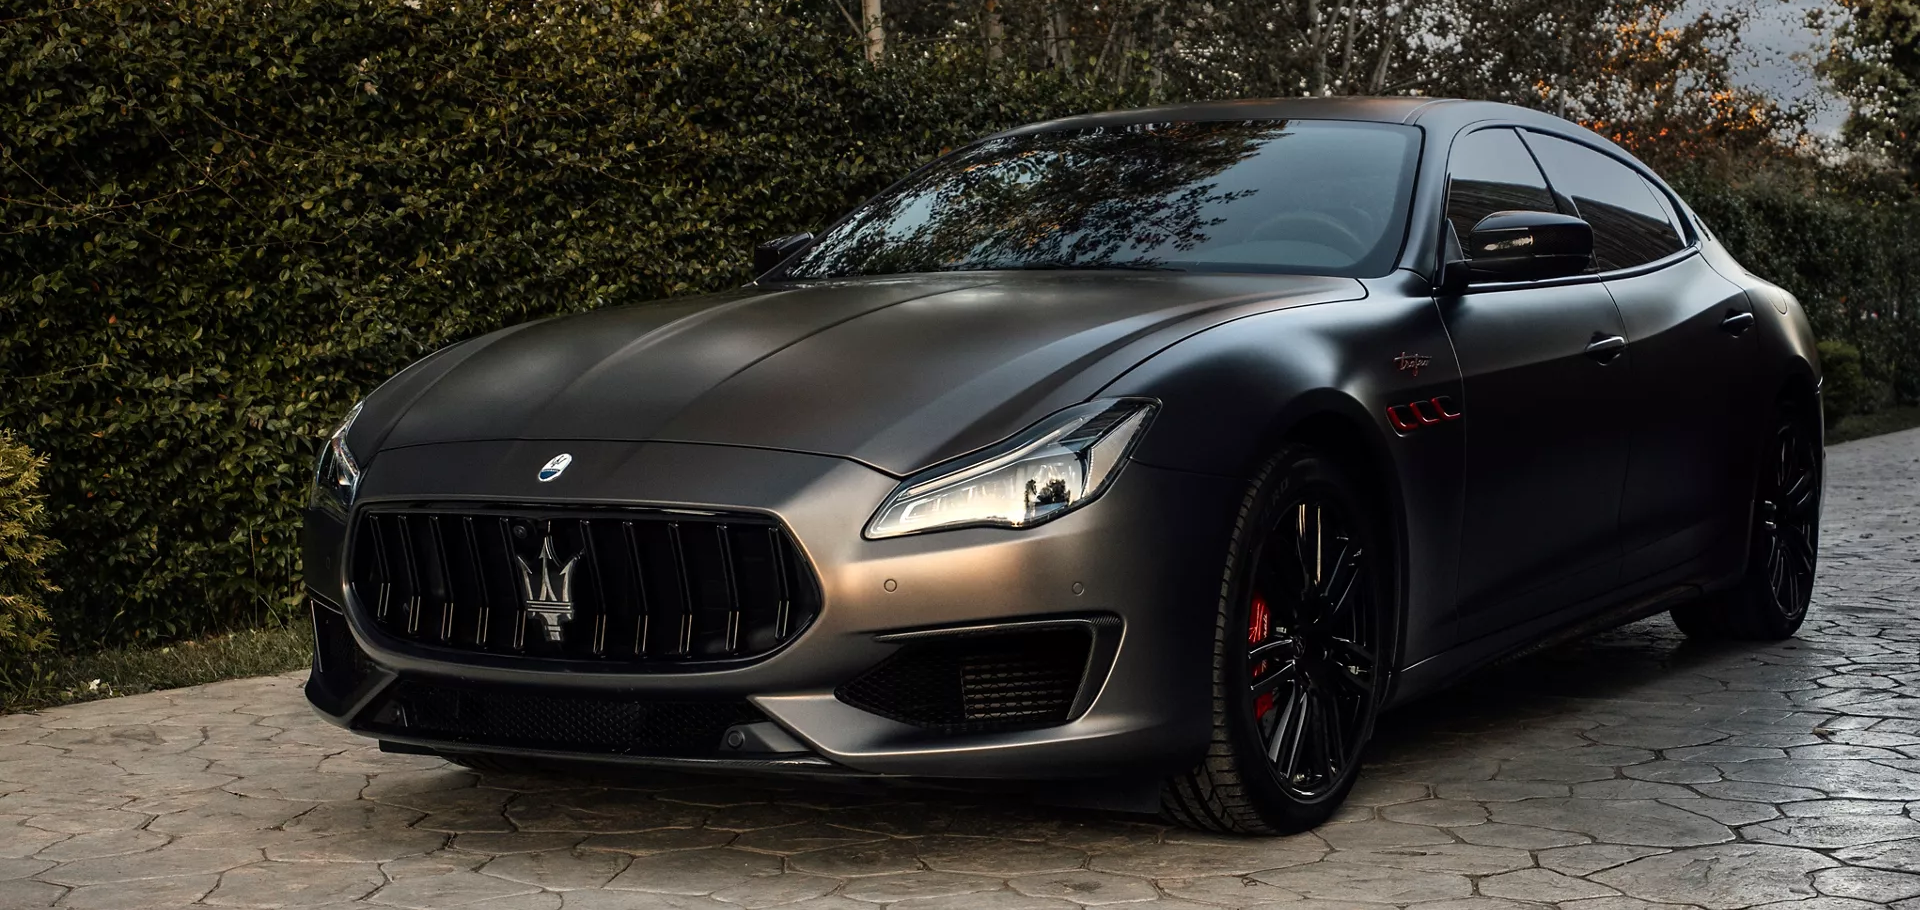 Maserati of Raleigh in Raleigh NC